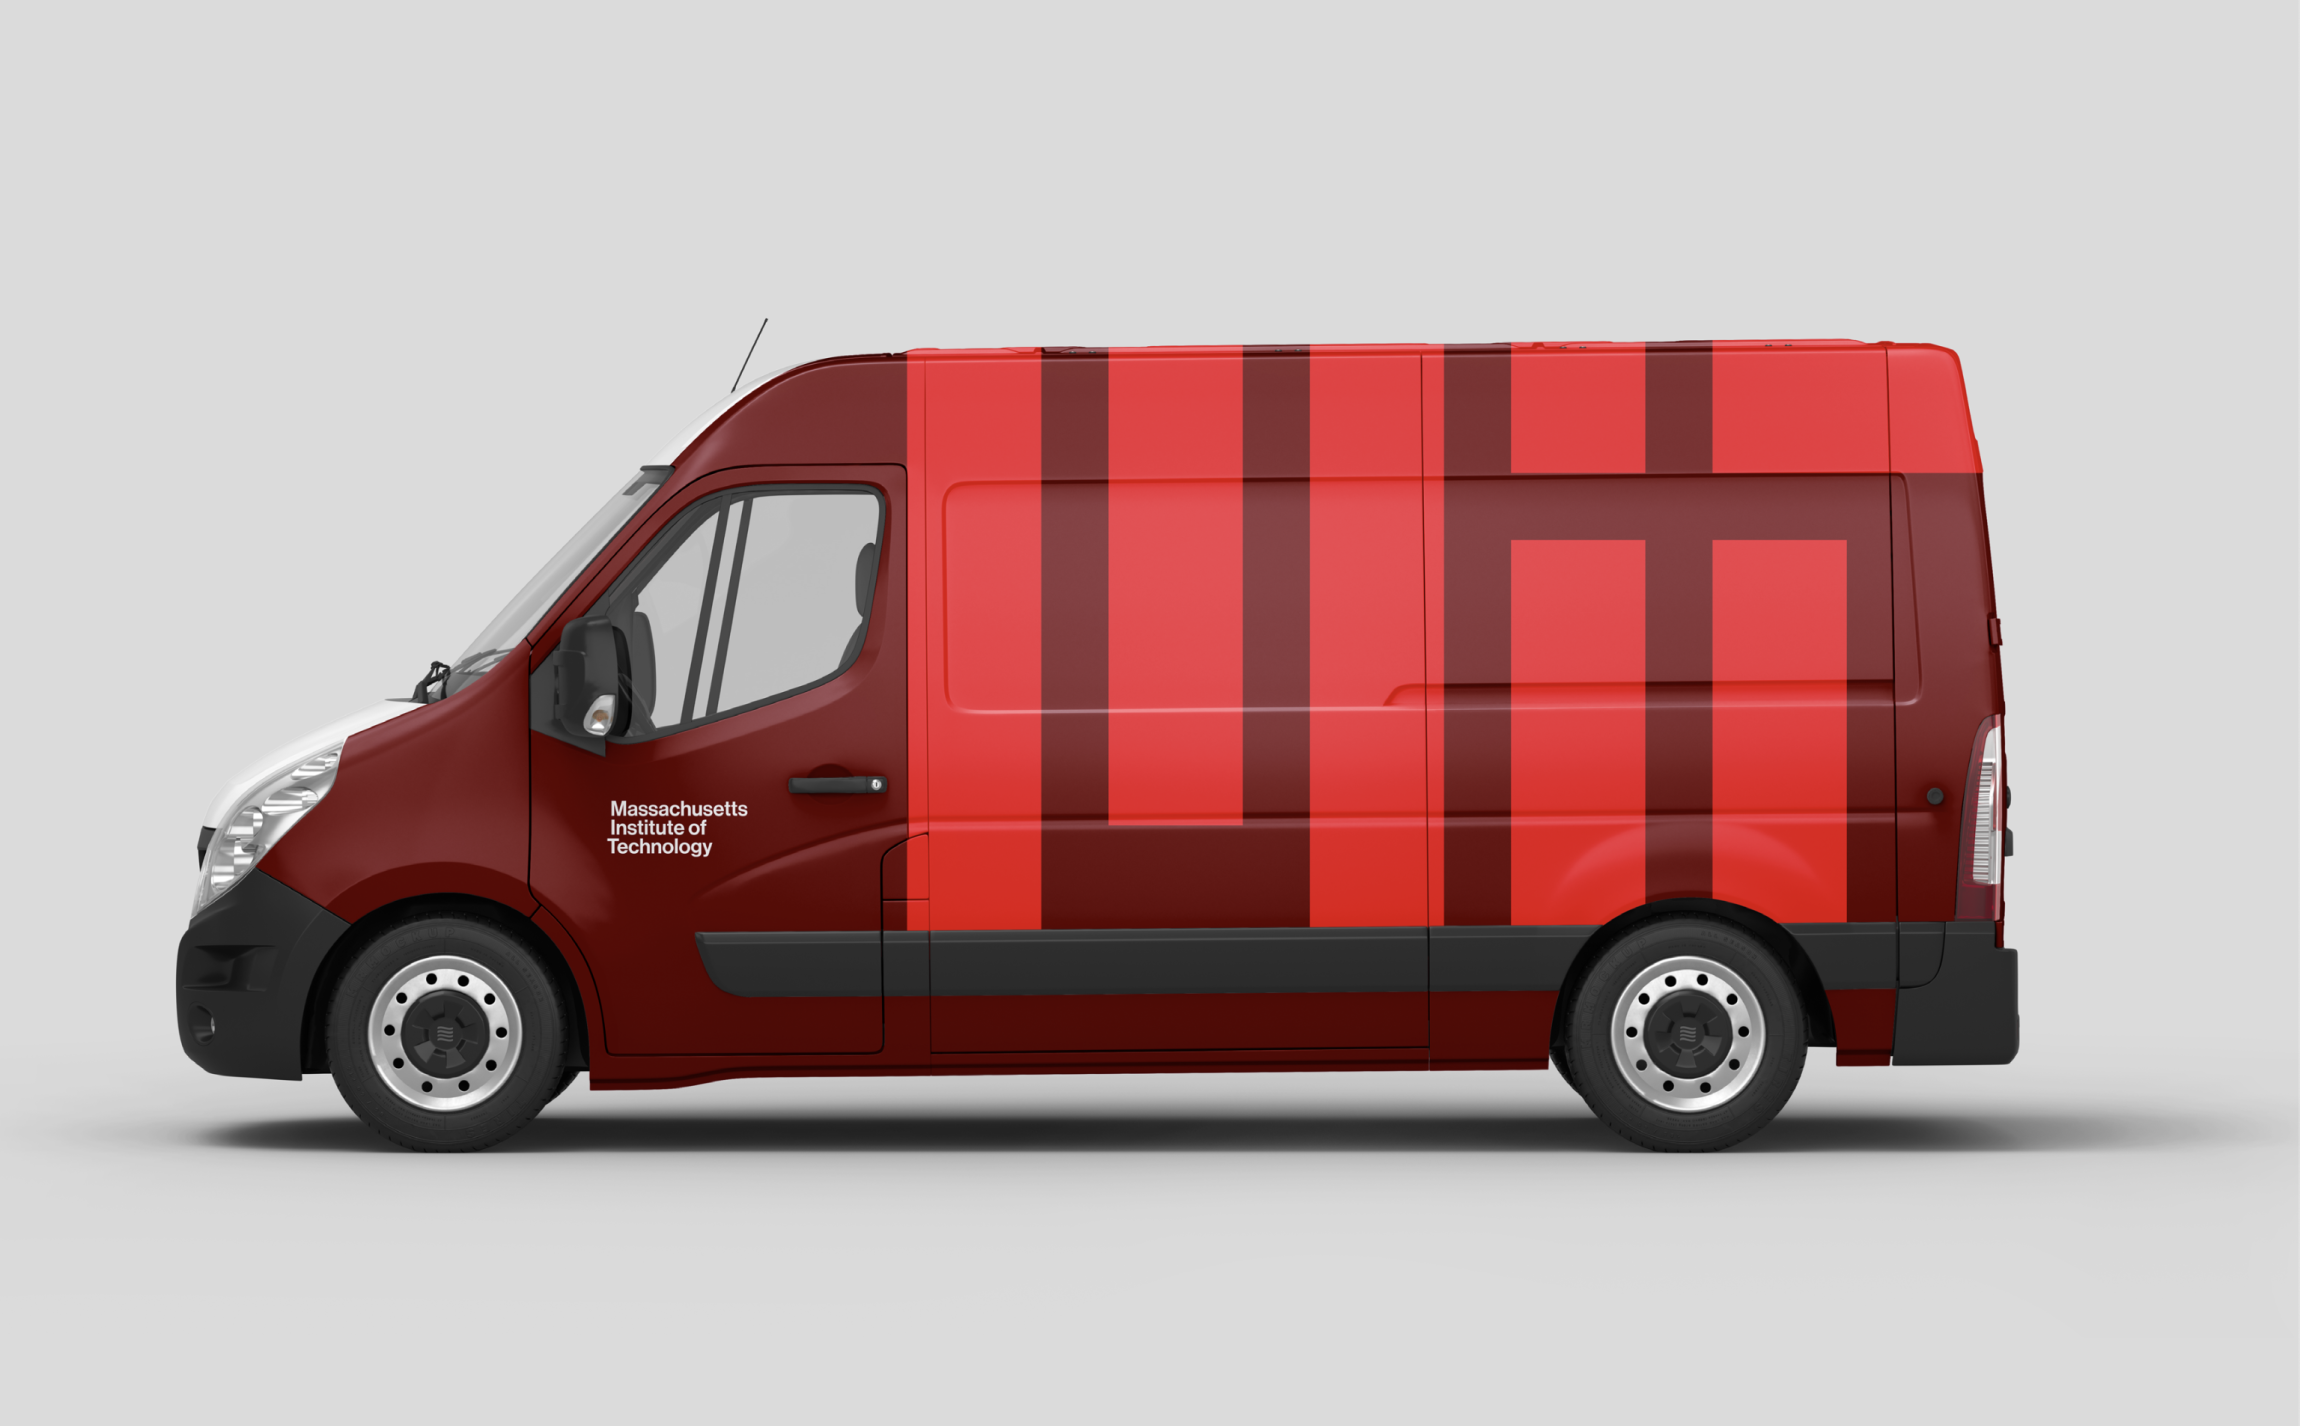 Conceptual design of an MIT Facilities van. The van is shown in MIT red, with a large bright red MIT logo and Massachusetts Institute of Technology in smaller white text.